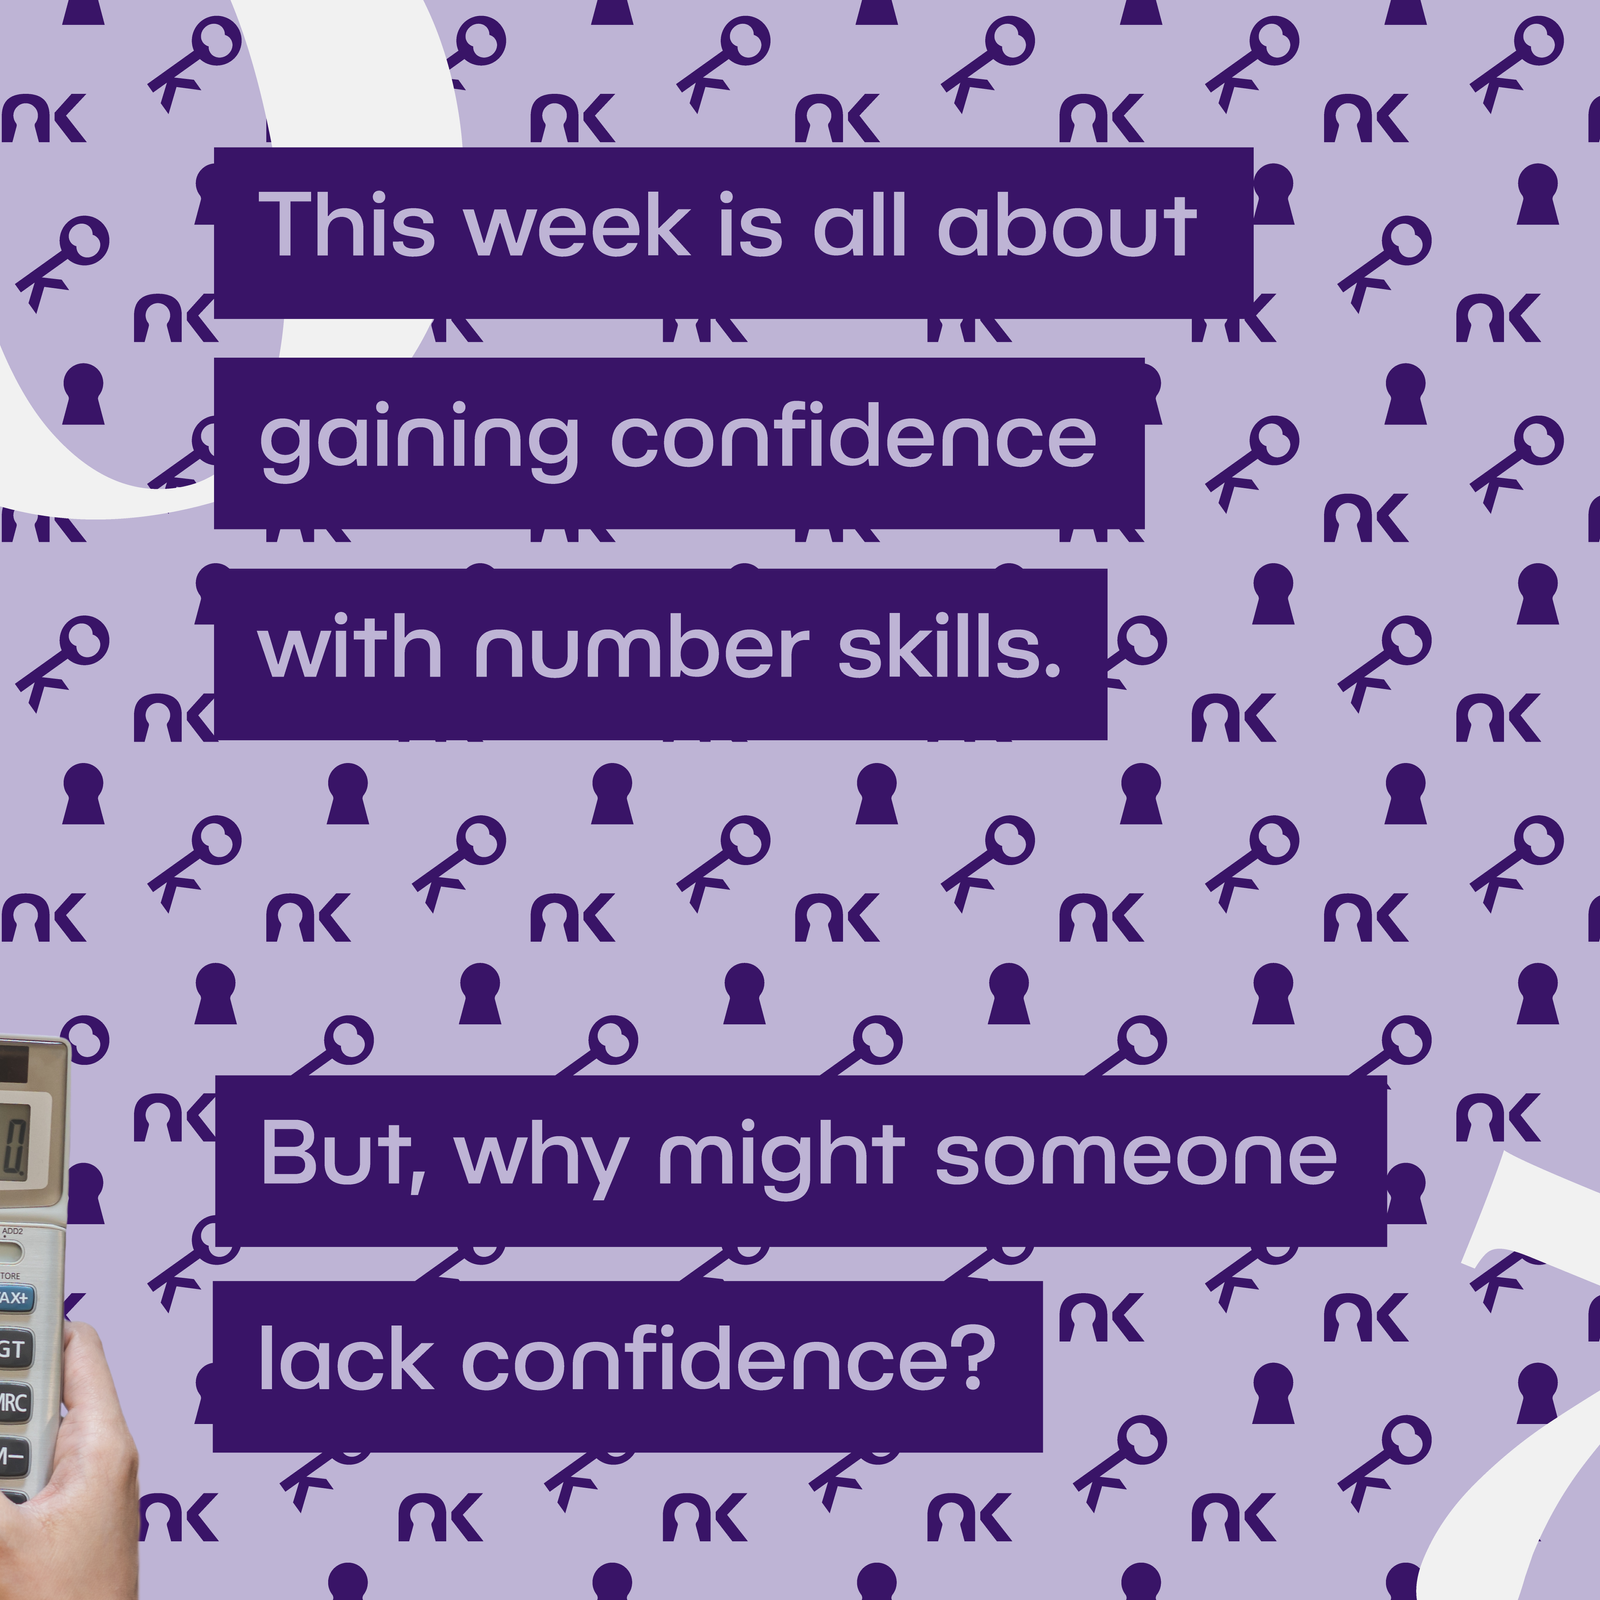 Text says "This week is all about gaining confidence with number skills. But, why might someone lack confidence?"